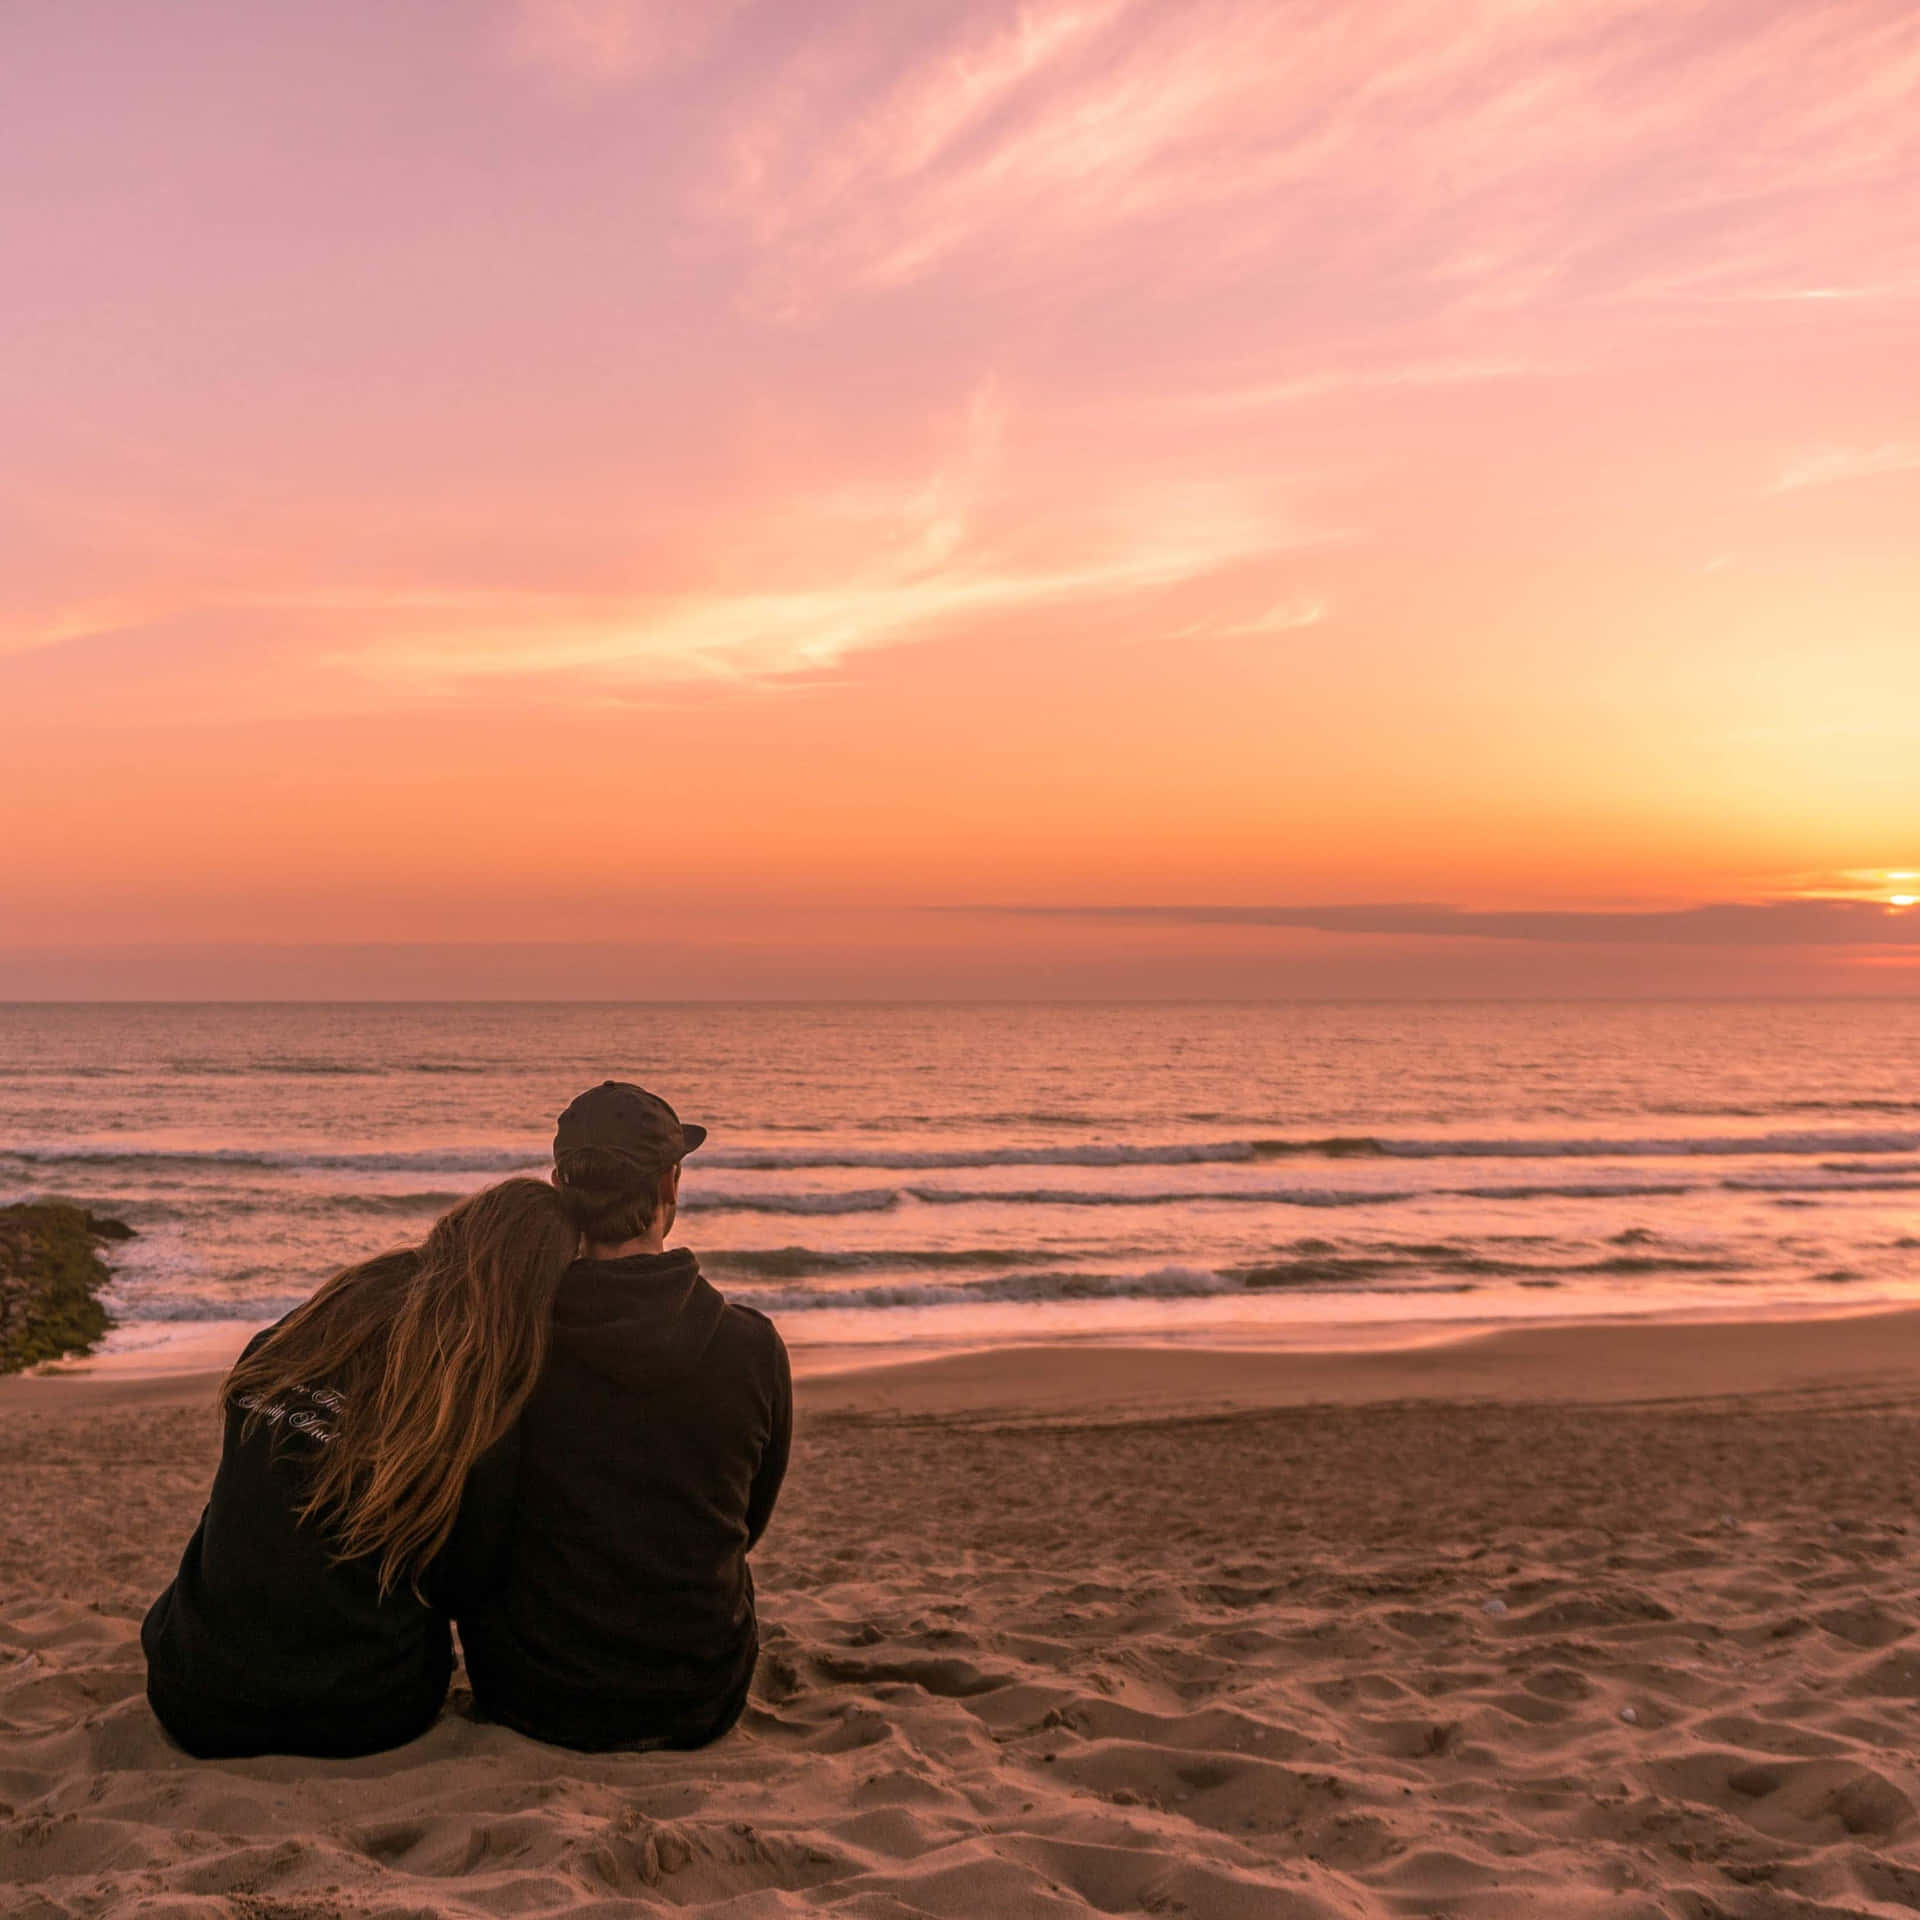 Couple At Beach Sitting On Sand During Sunset Picture